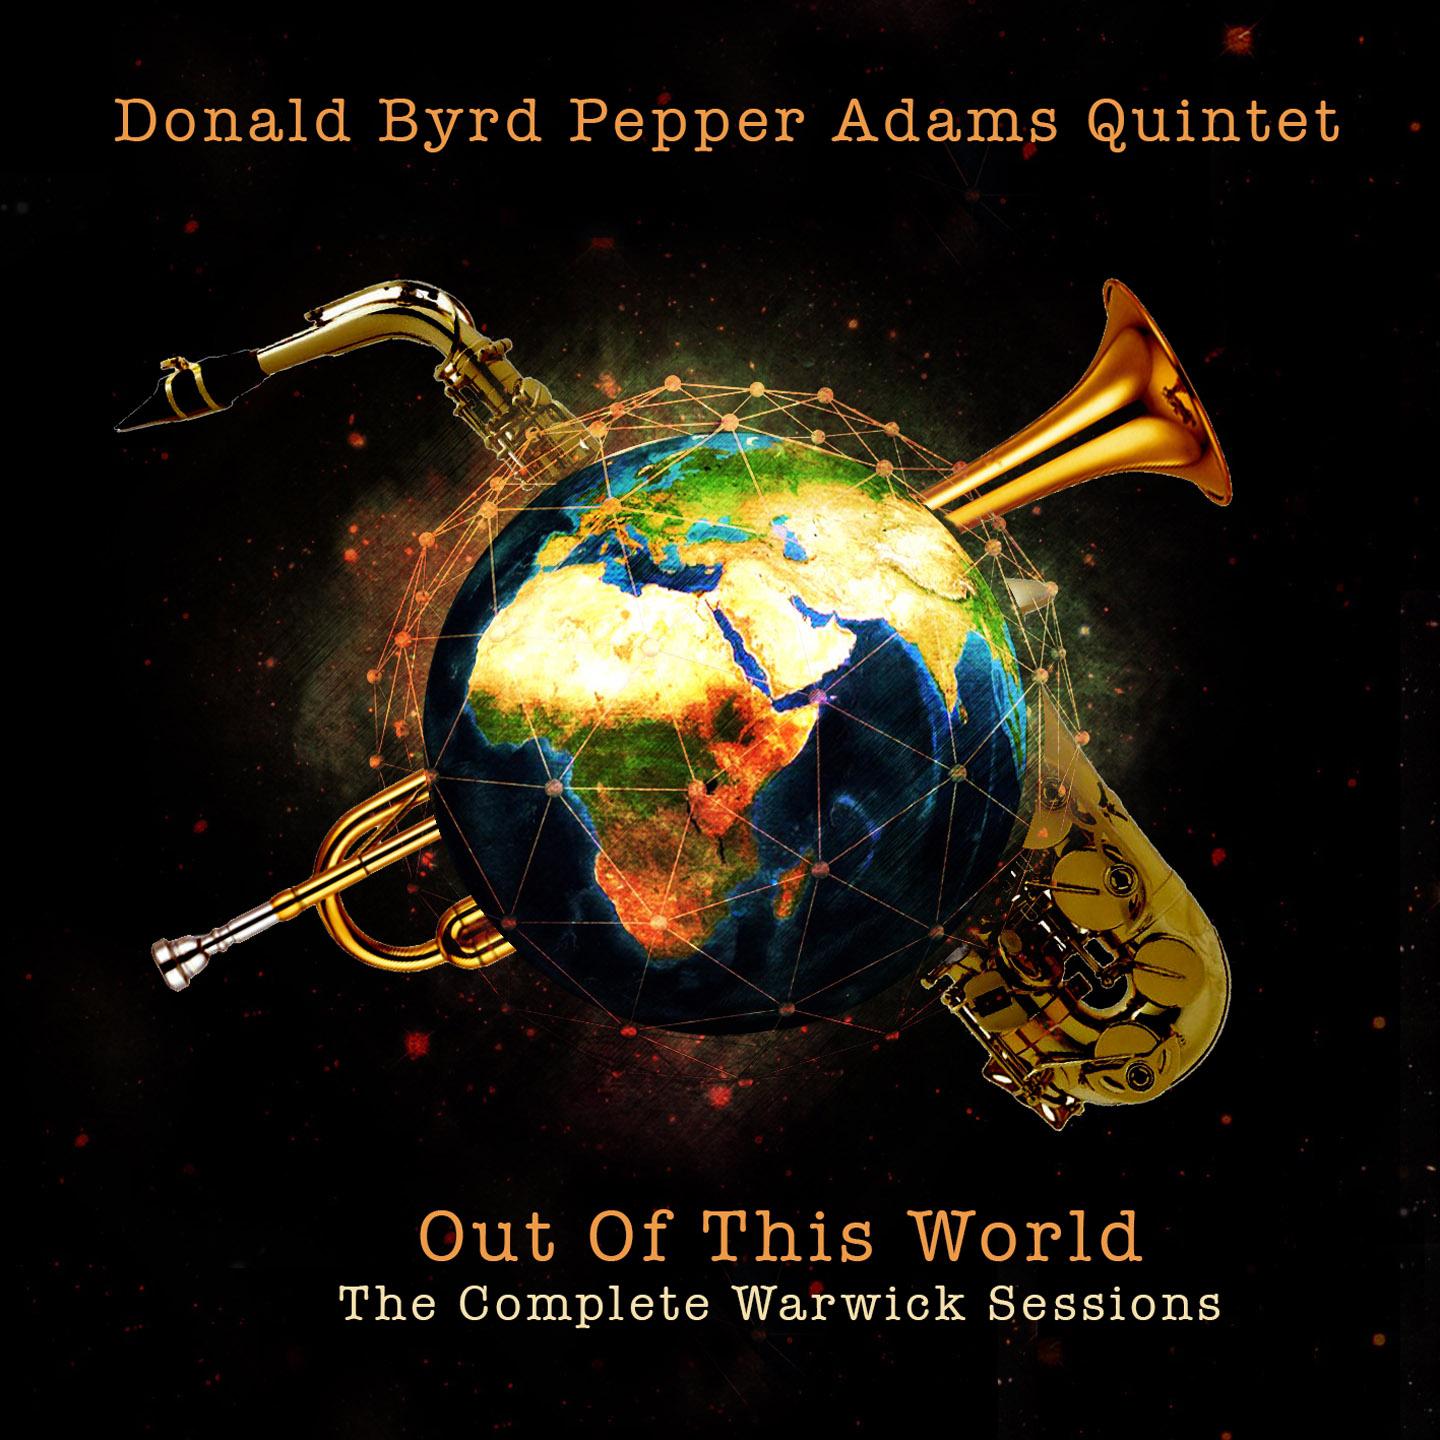 Donald Byrd Pepper Adams Quintet: Out of This World - The Complete Warwick Sessions